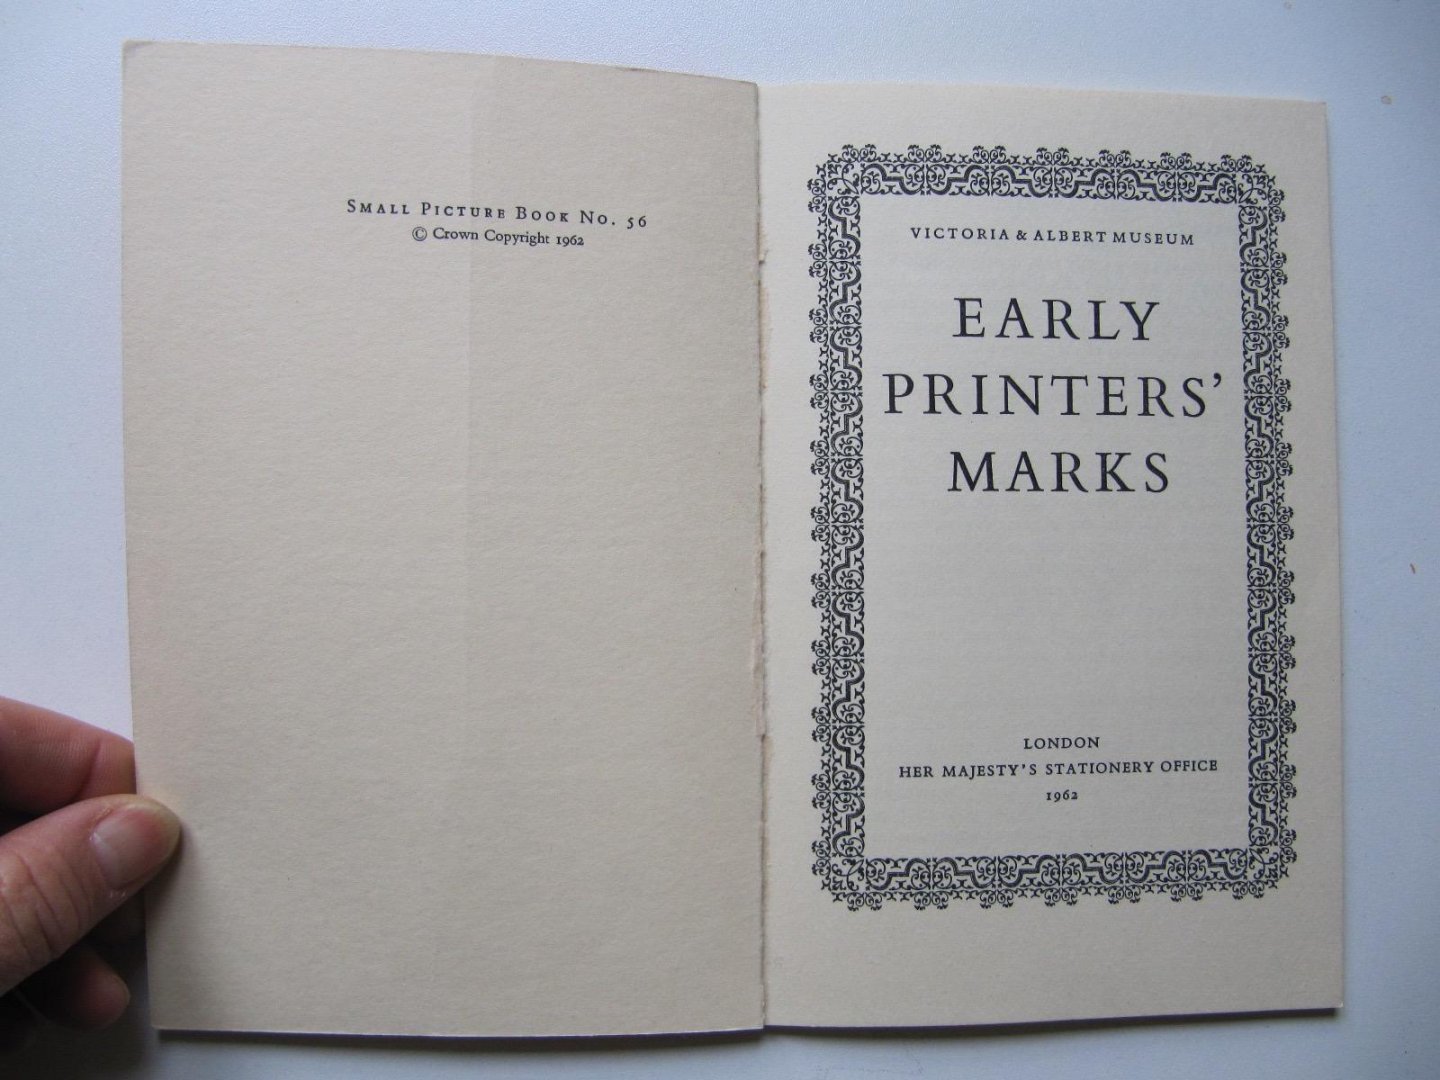 Victoria & Albert Museum - Early Printers' Marks